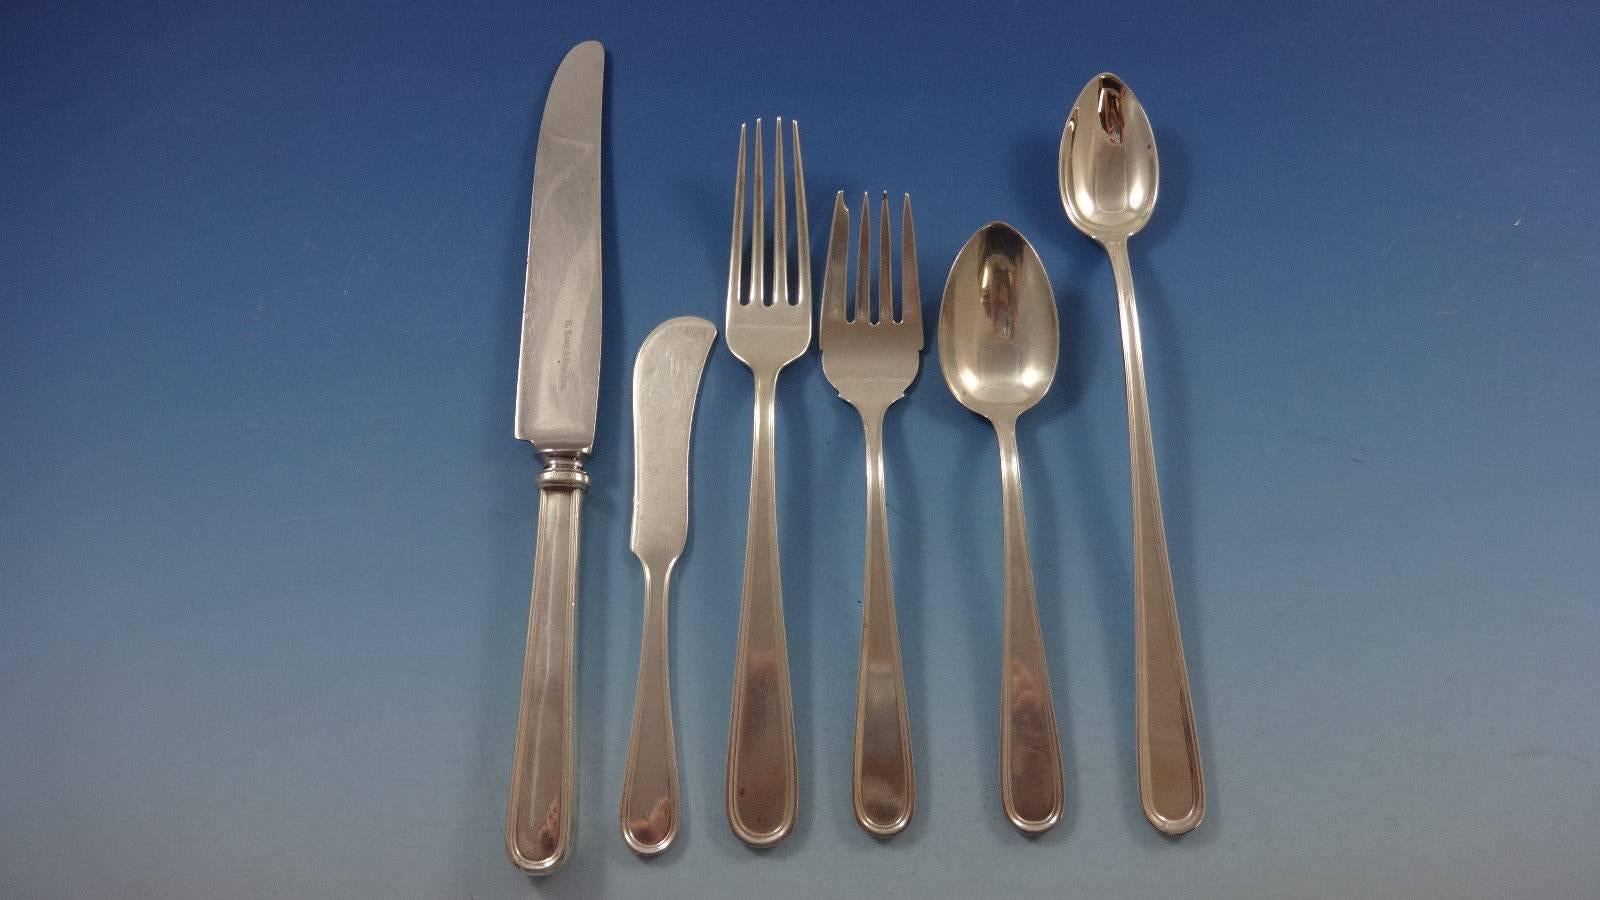 Calvert by Kirk sterling silver flatware set with rounded and threaded design with 52 pieces. This set includes:

Eight knives, 8 7/8